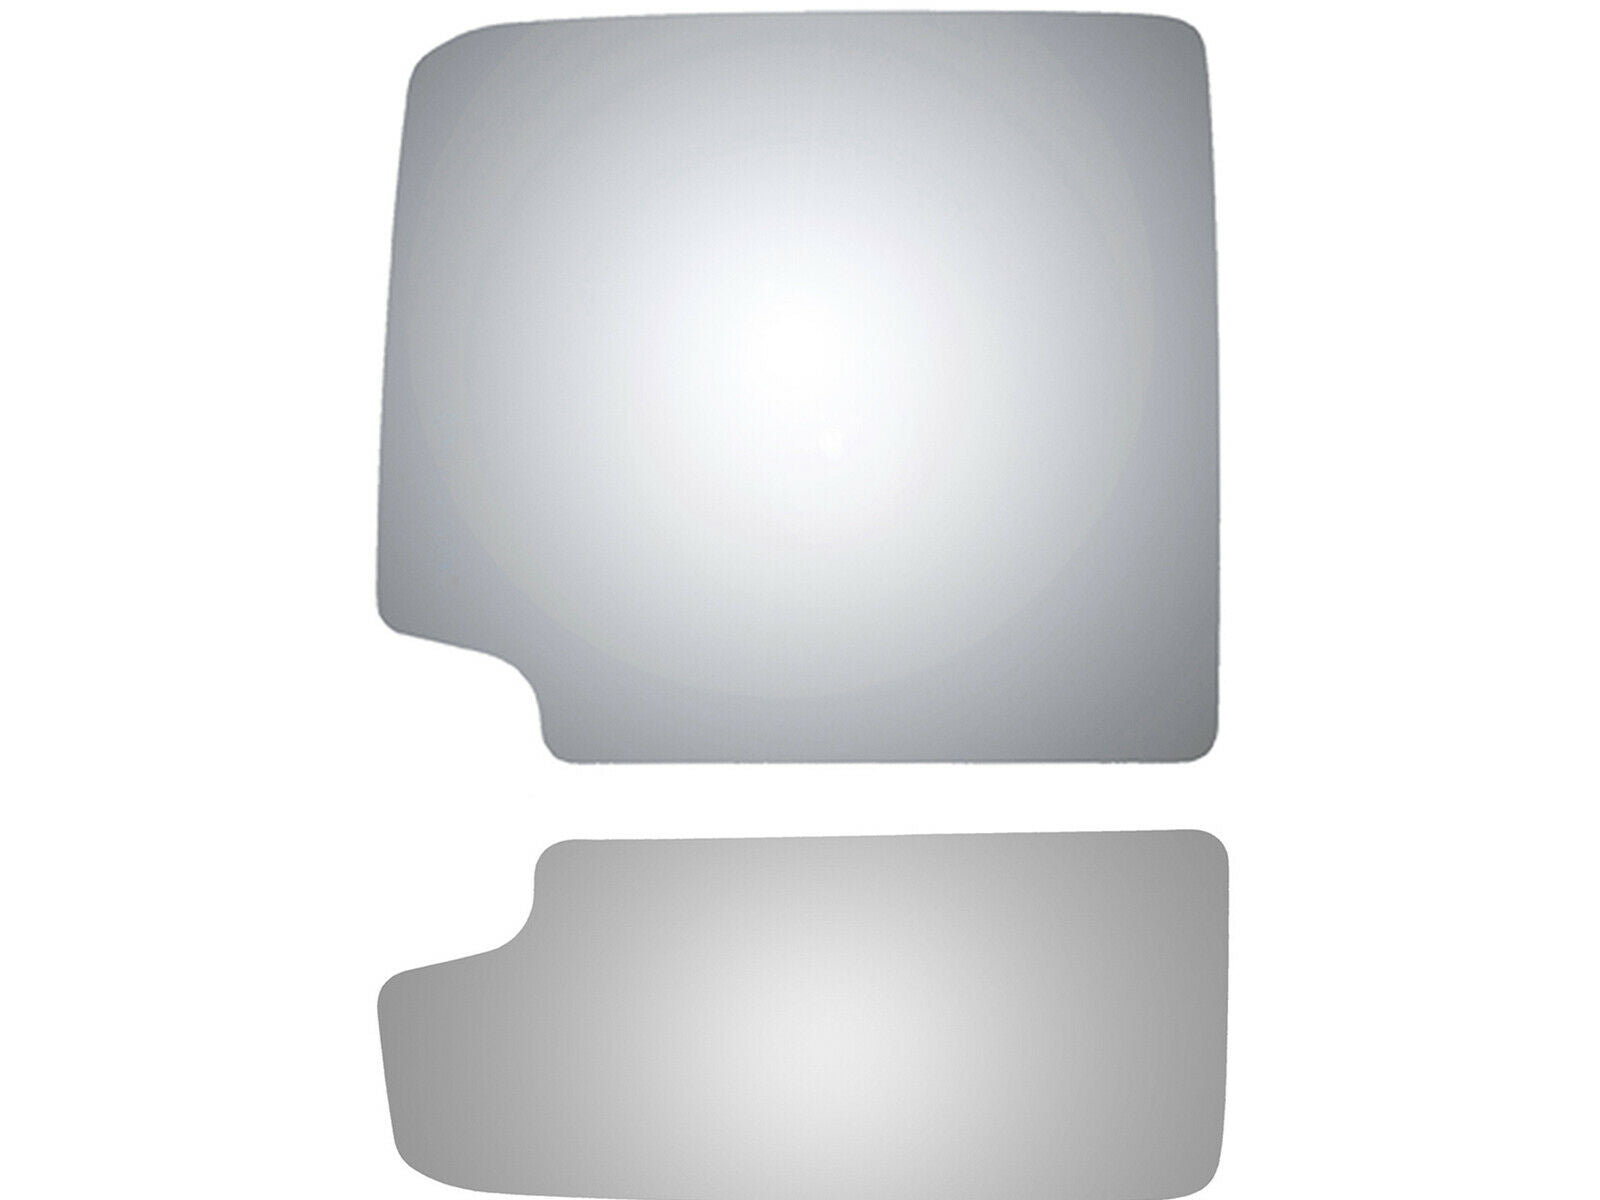 WLLW a Pair of Towing Mirror Glass for Cadillac Escalade/ Chevy Avalanche Blazer /GMC Jimmy Sierra Yukon, Driver Left/Passenger Right/The Both Sides Upper&Lower Flat Convex D-0019